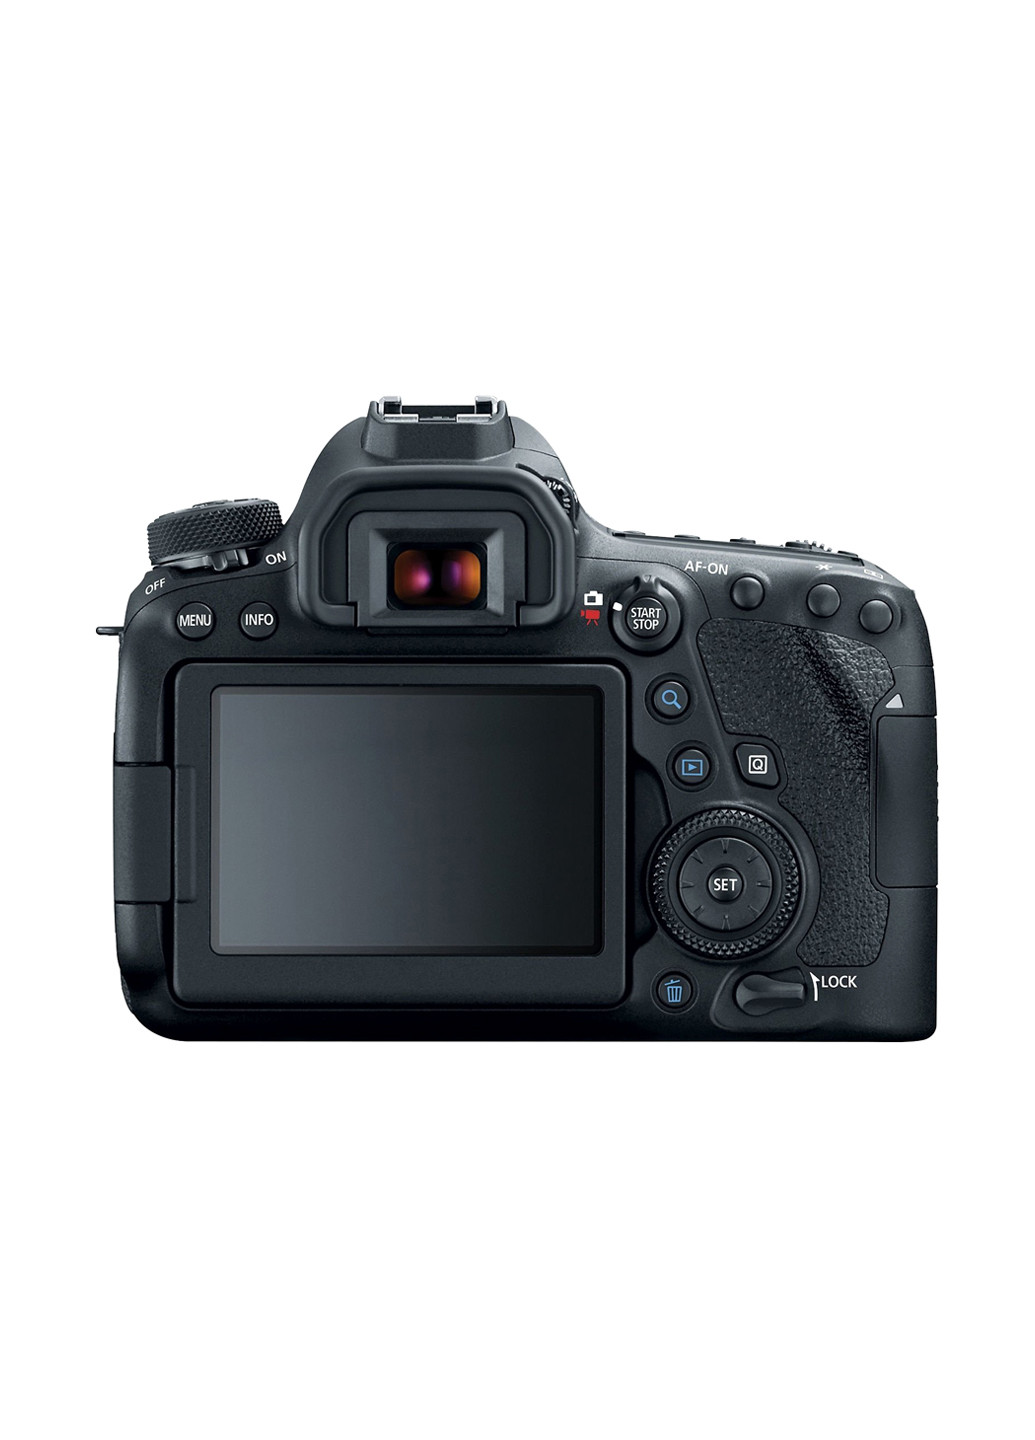 Дзеркальна фотокамера Canon eos 6d mkii kit 24-105 is stm (130470415)